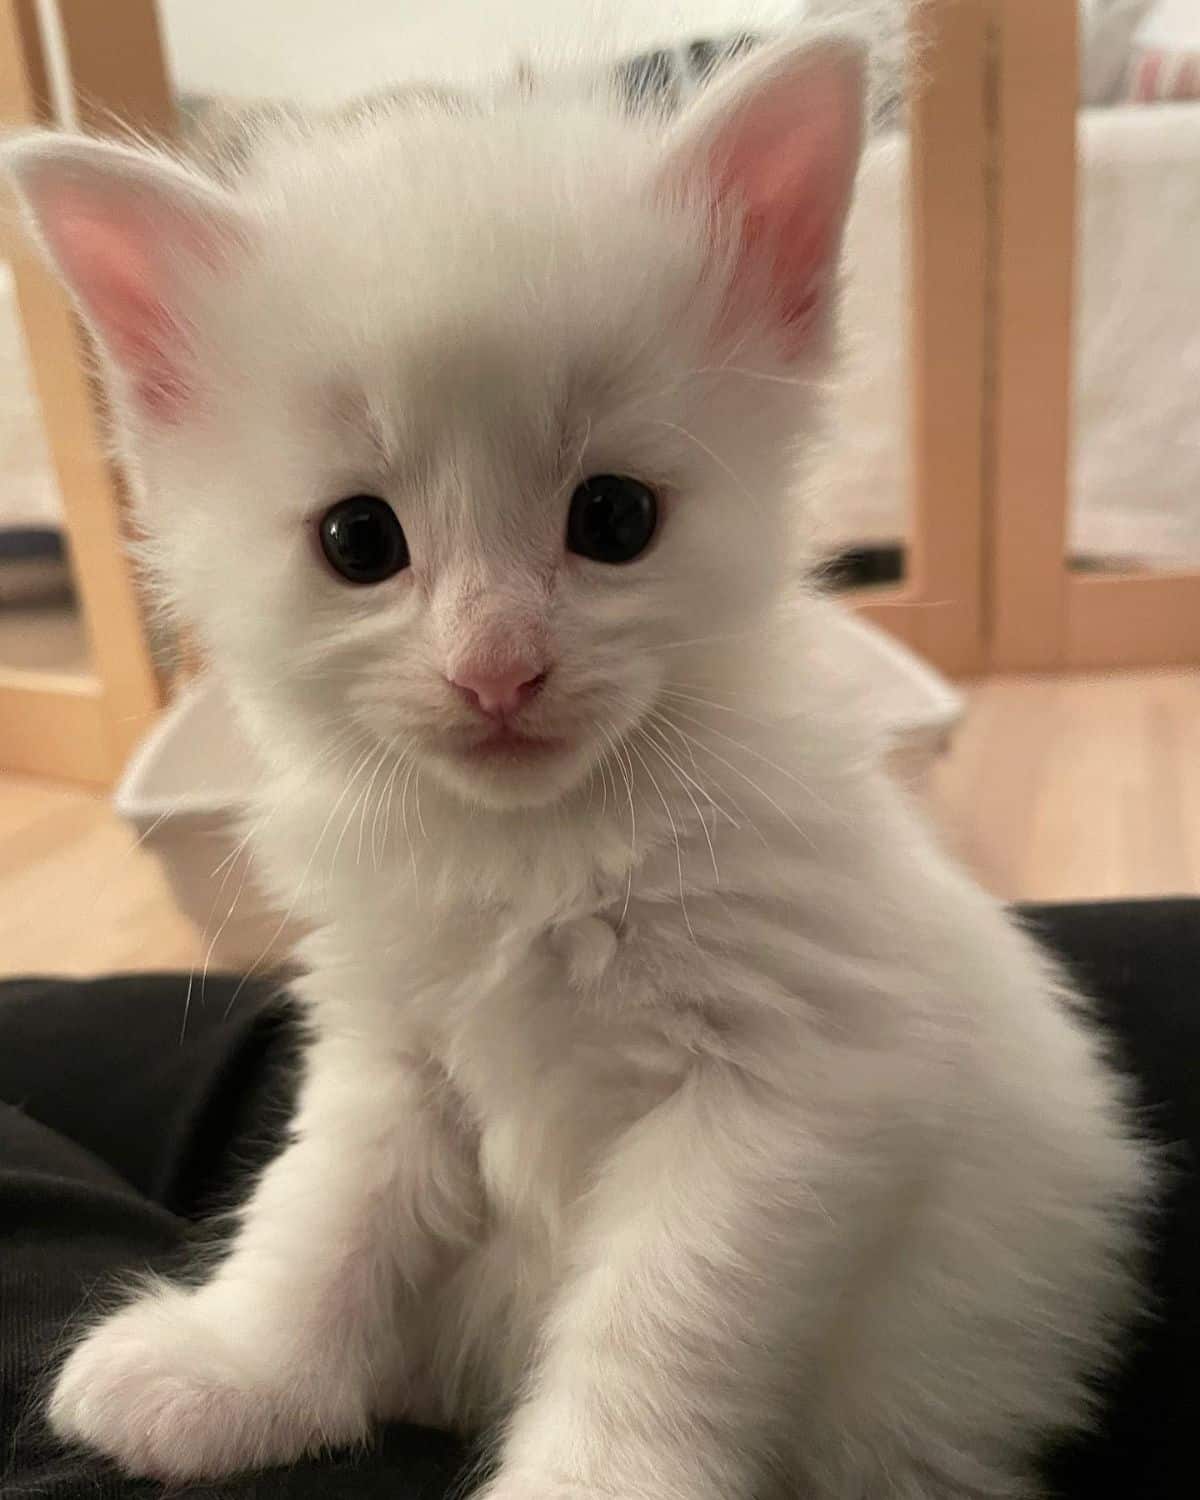 A cute white maine coon kitten with dark eyes sitting on a couch.